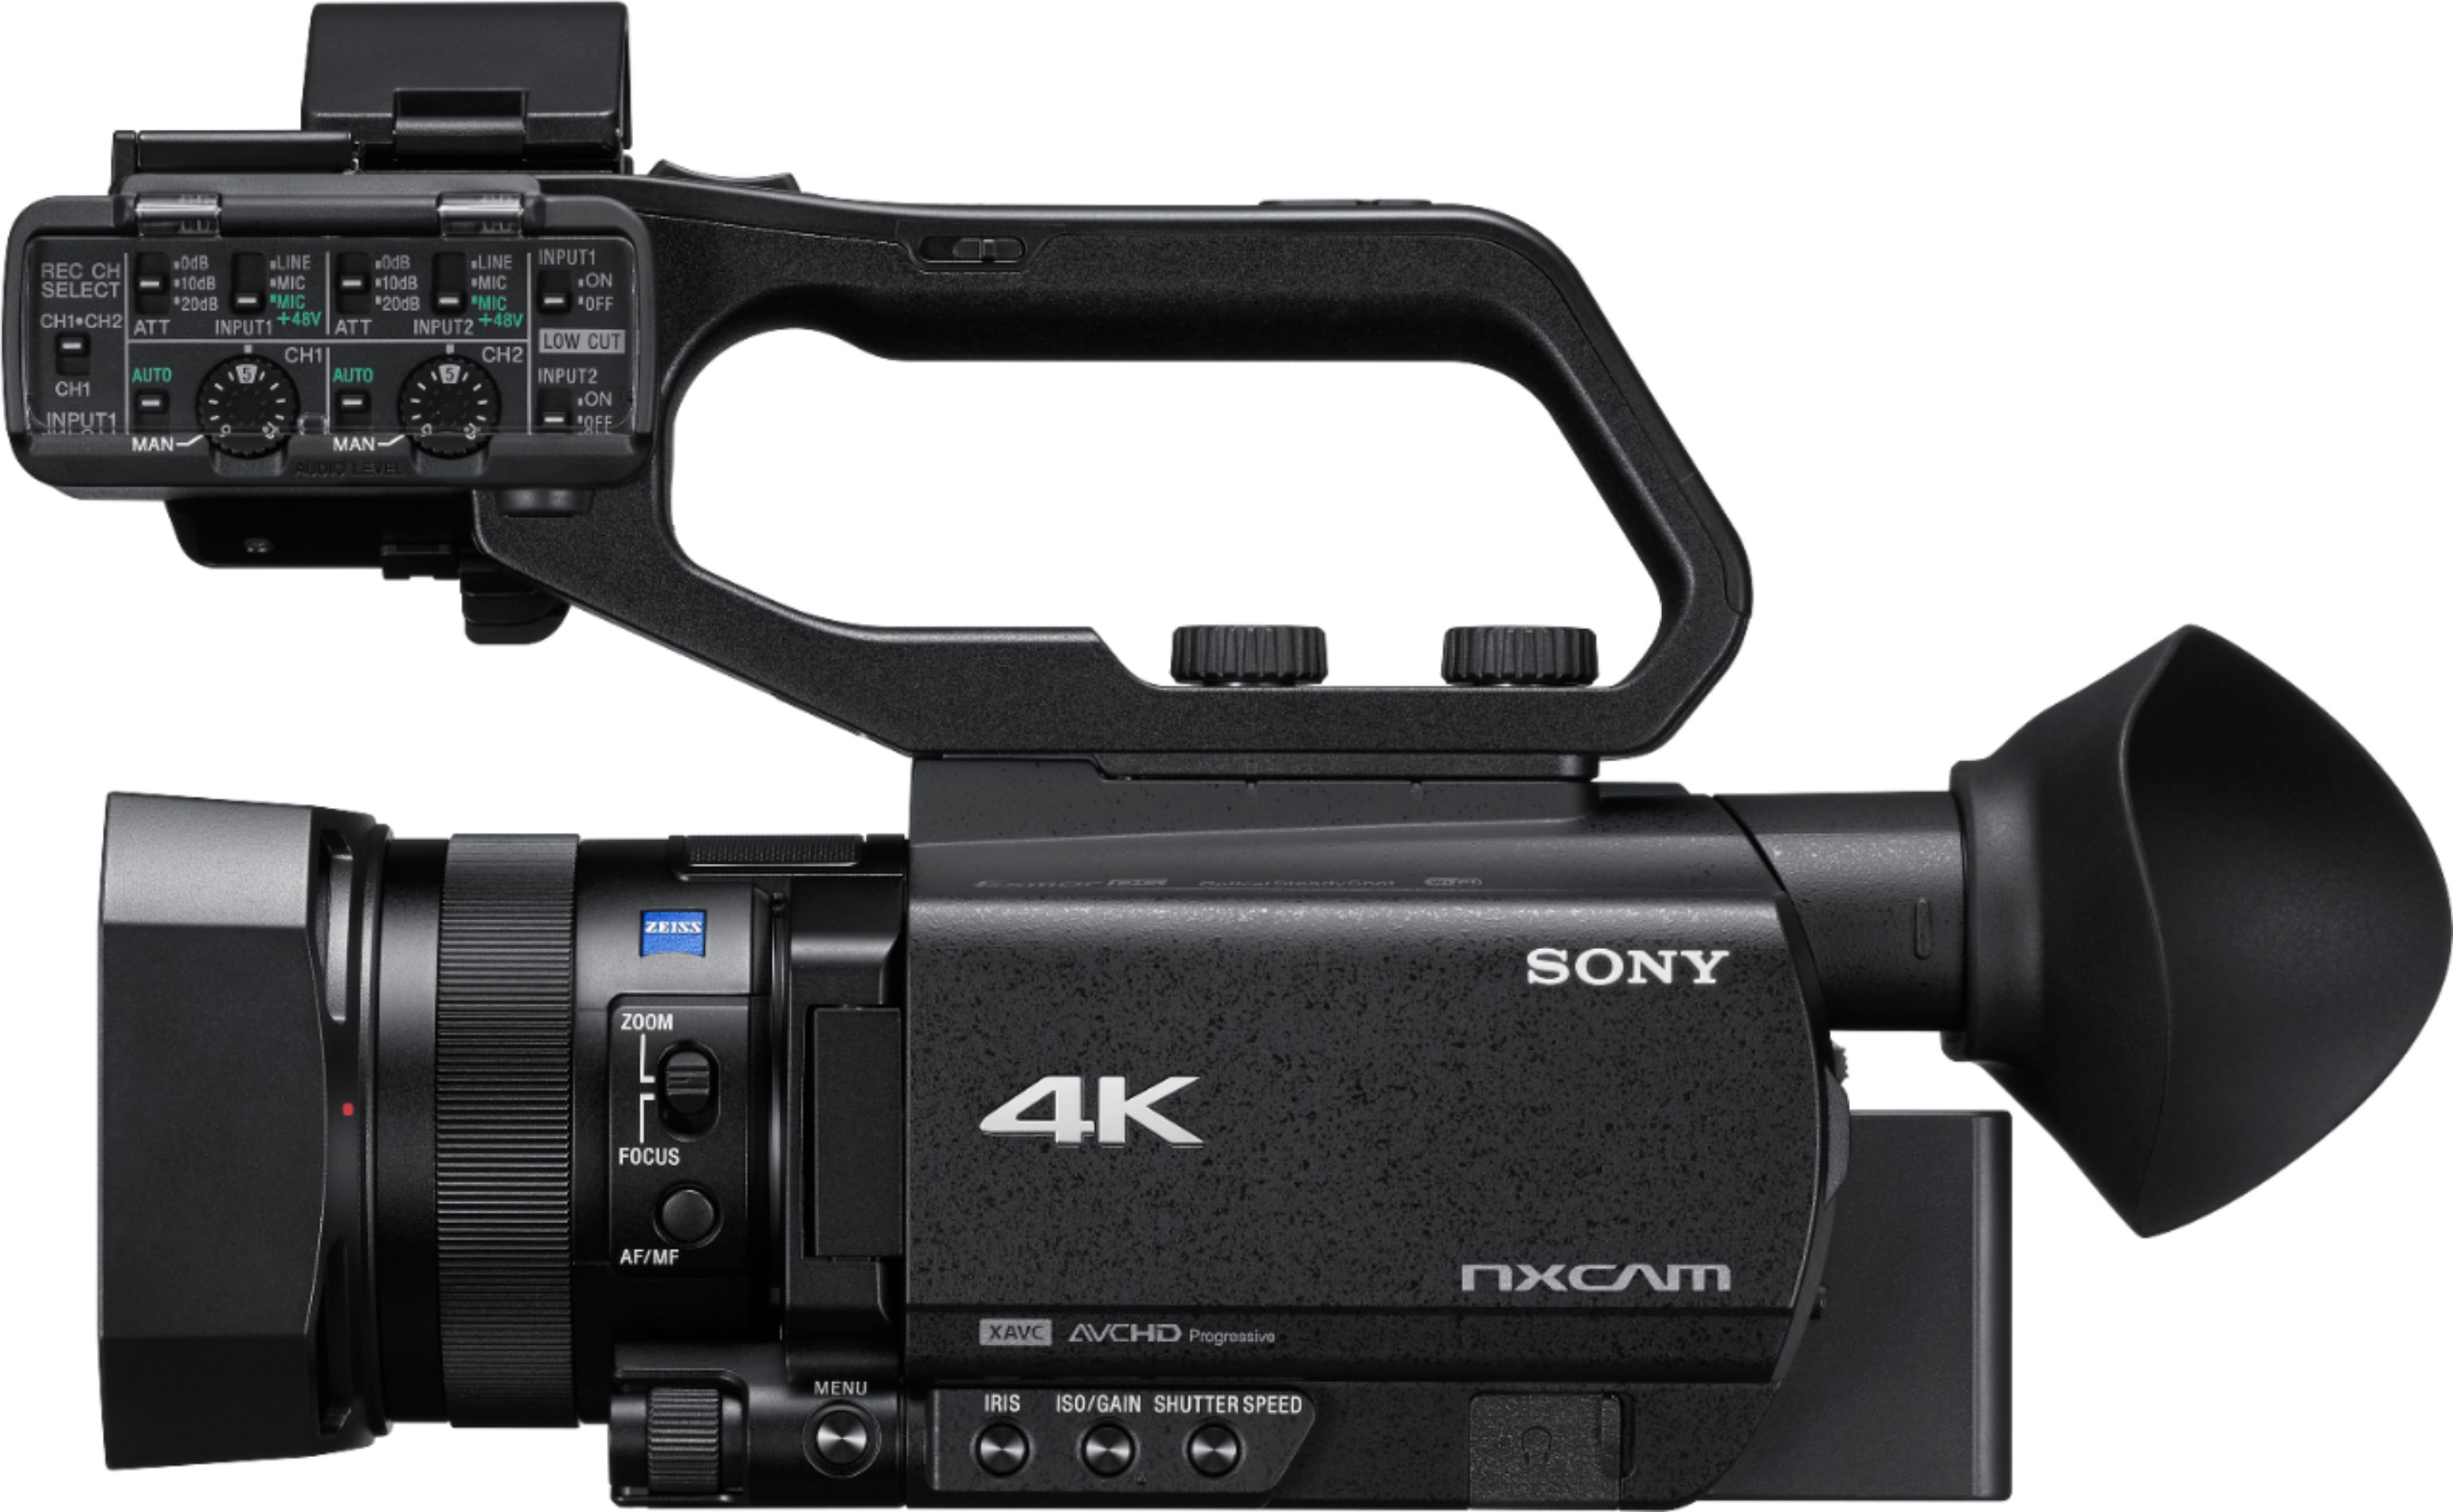 Left View: Sony - NXCAM 4K Compact HDR Camcorder with 1" Exmor sensor - Black